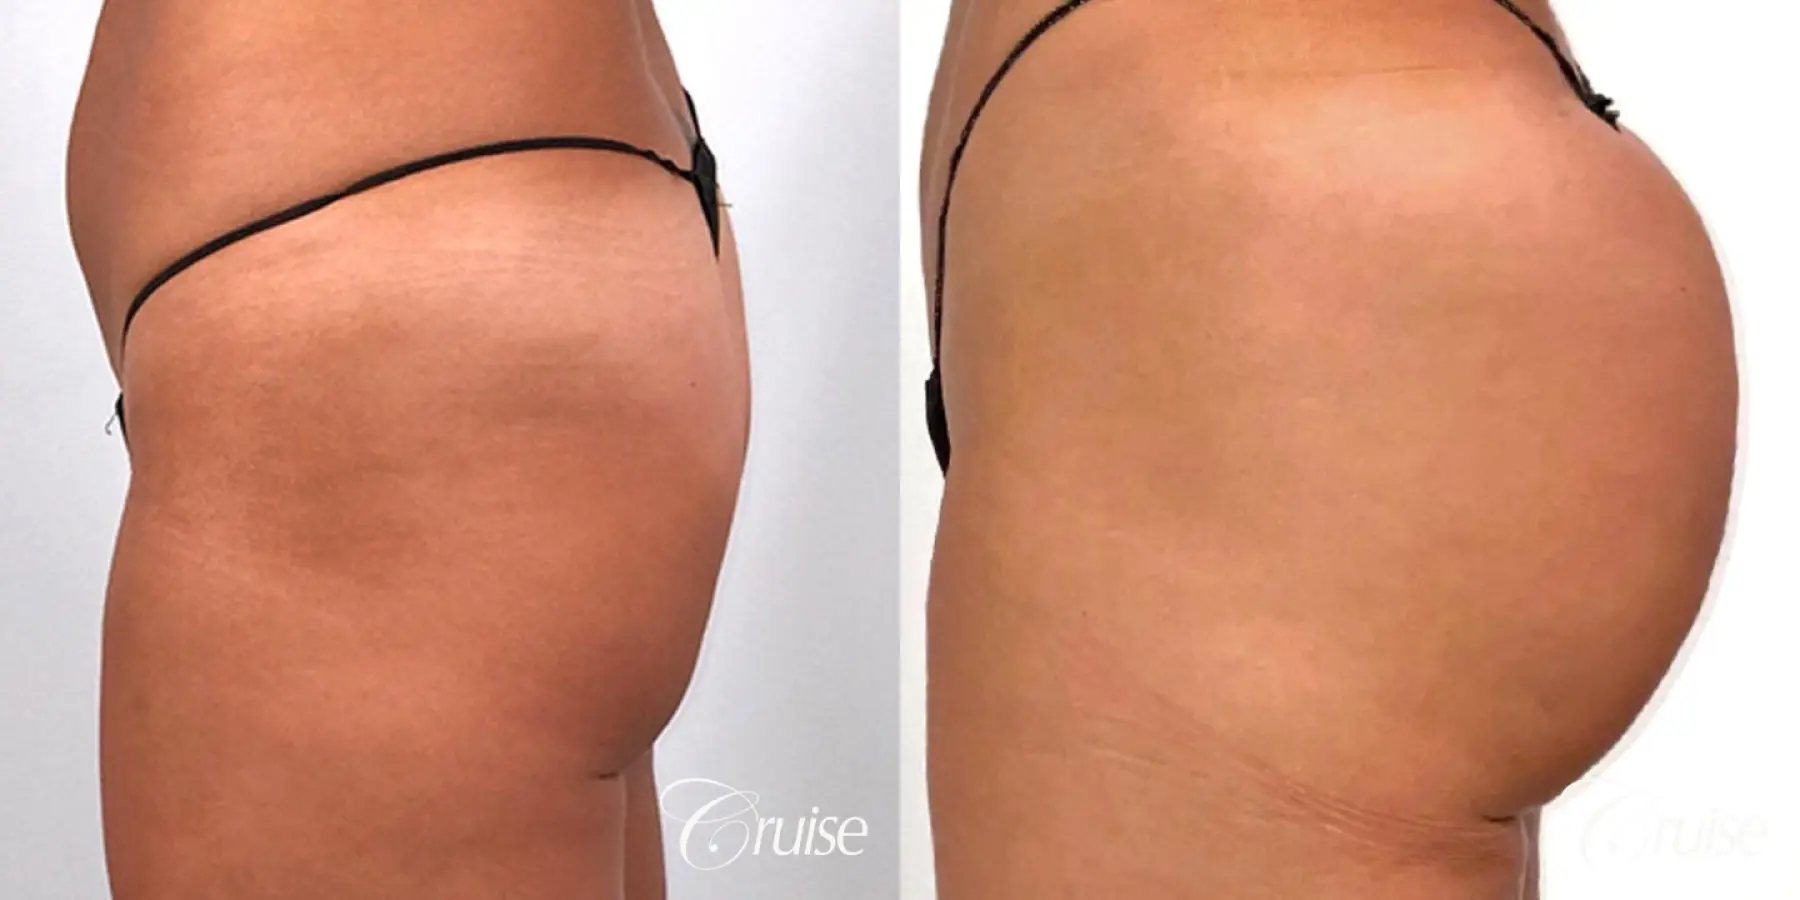 Brazilian Butt Lift with Liposuction to Stomach & Flanks - Before and After 5